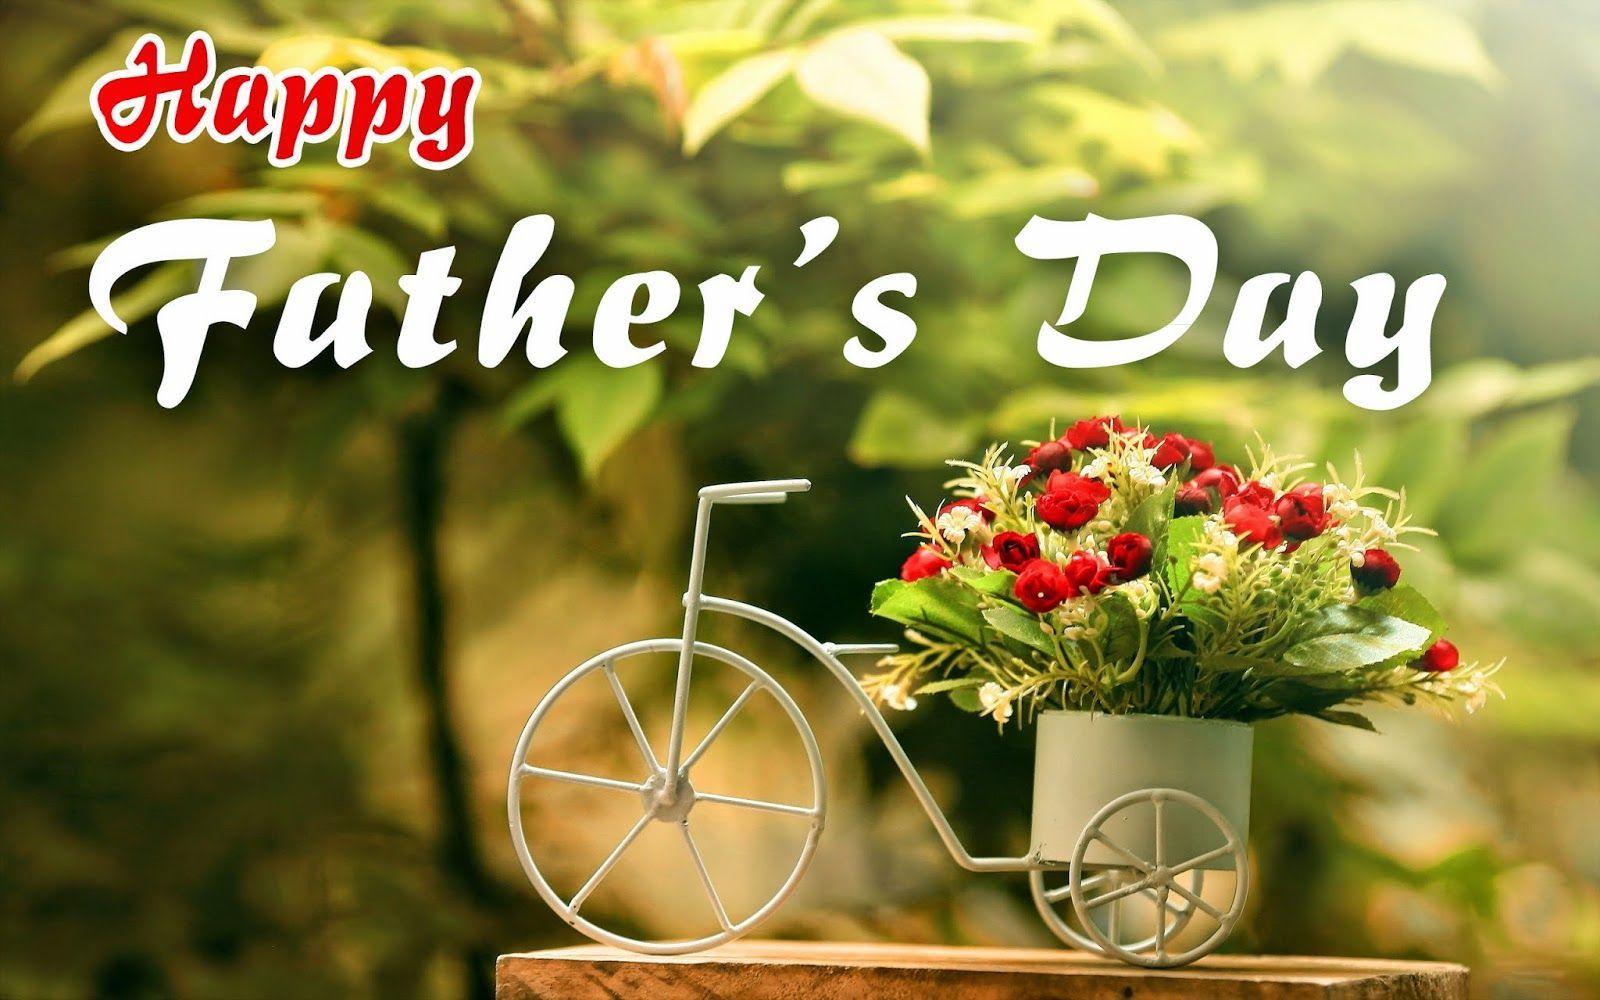 Happy Fathers Day Wallpapers - Top Free Happy Fathers Day ...